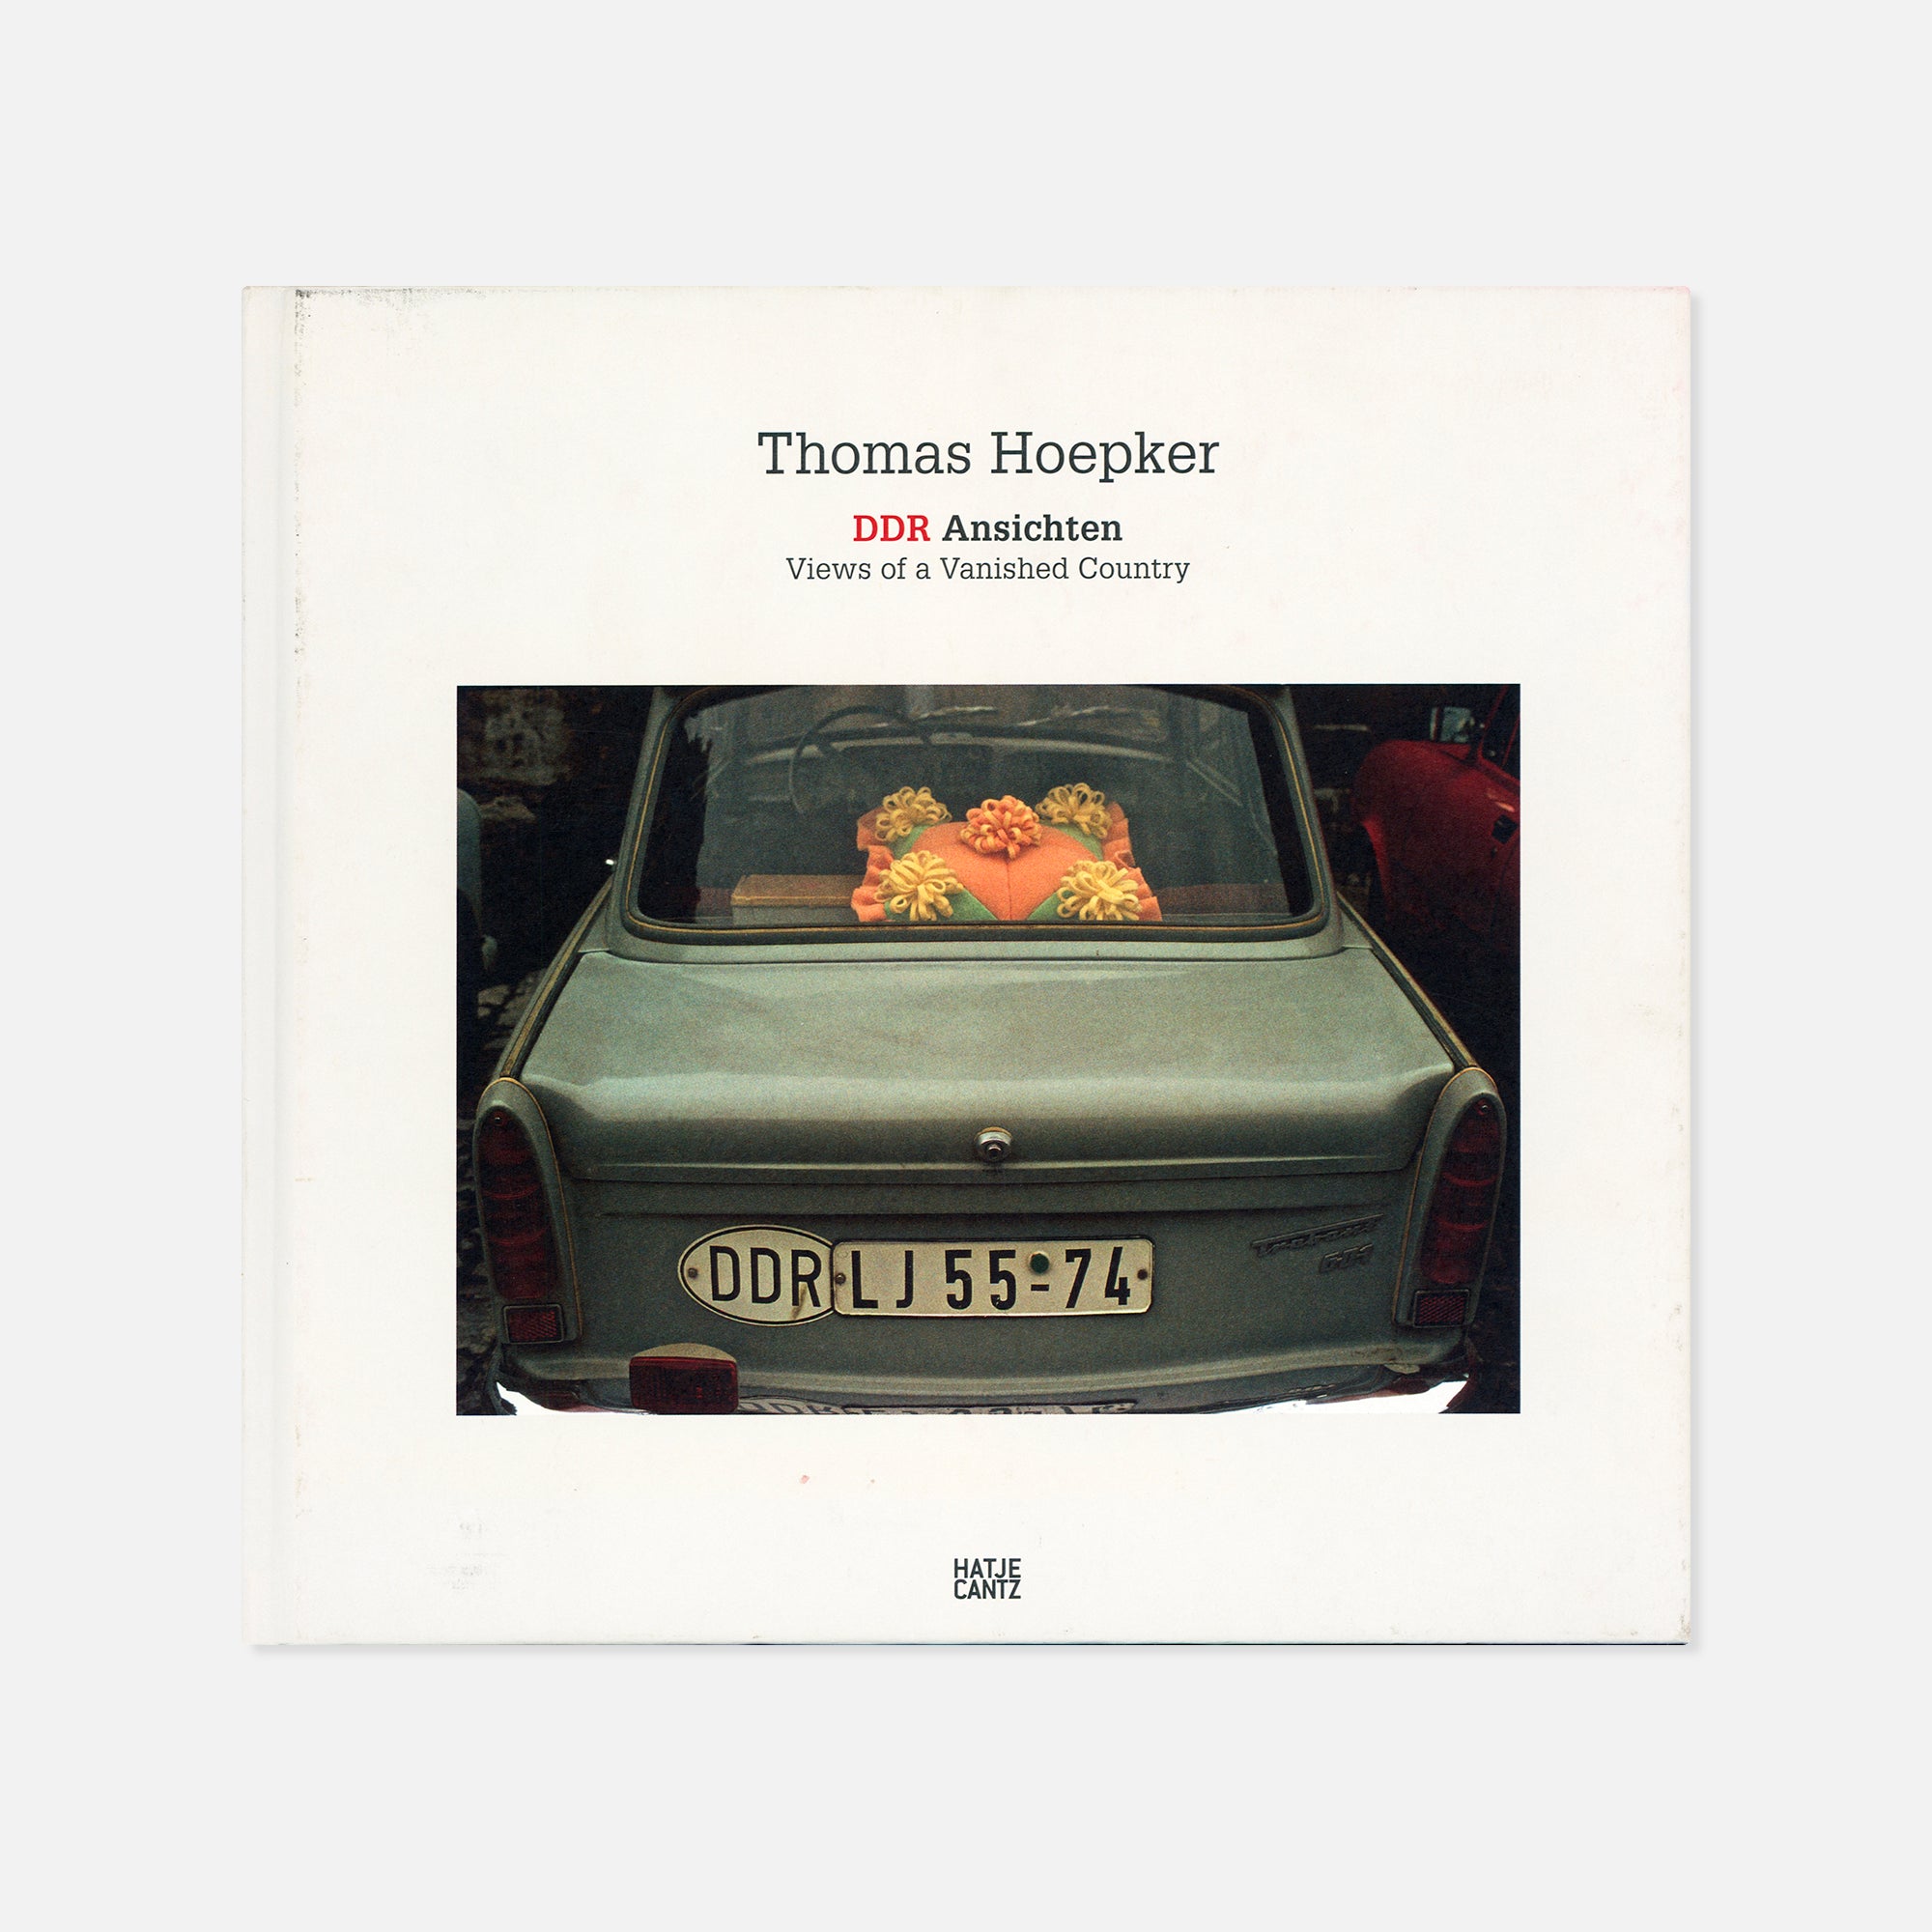 Thomas Hoepker — DDR Ansichten, Views of a Vanished Country